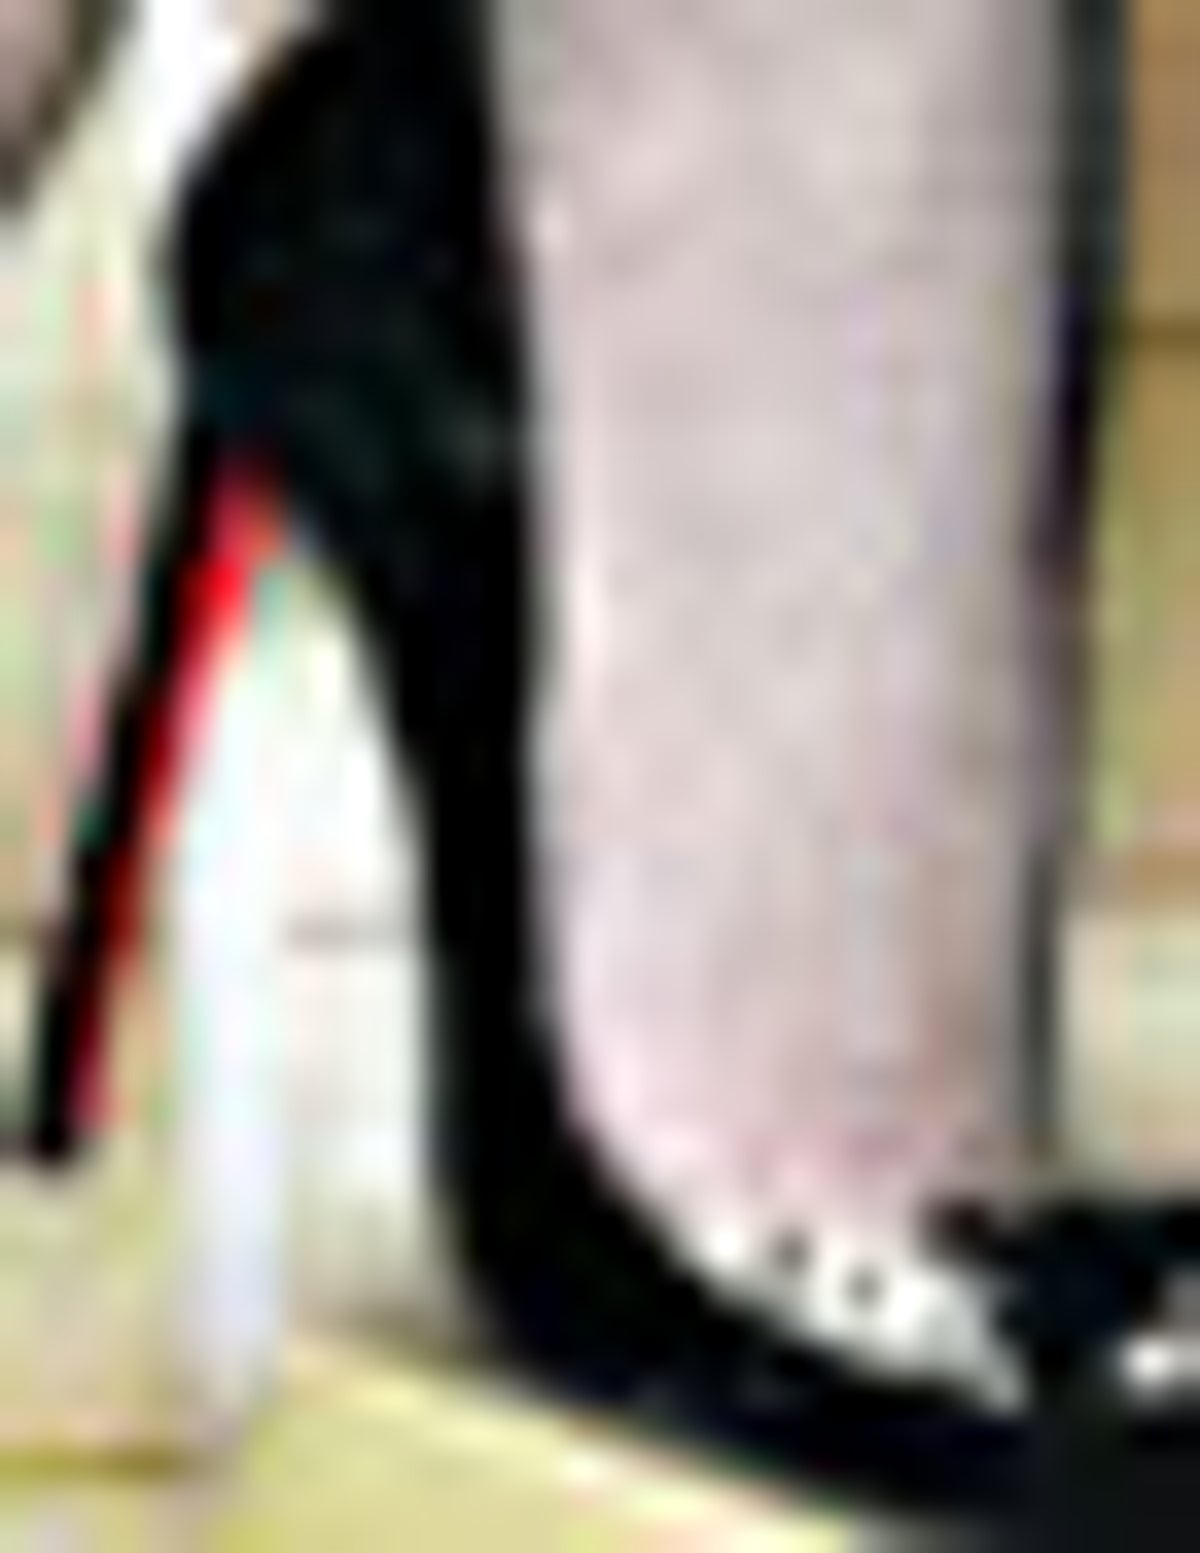 Style By Cat: I Love: my Christian Louboutin wedding shoes!